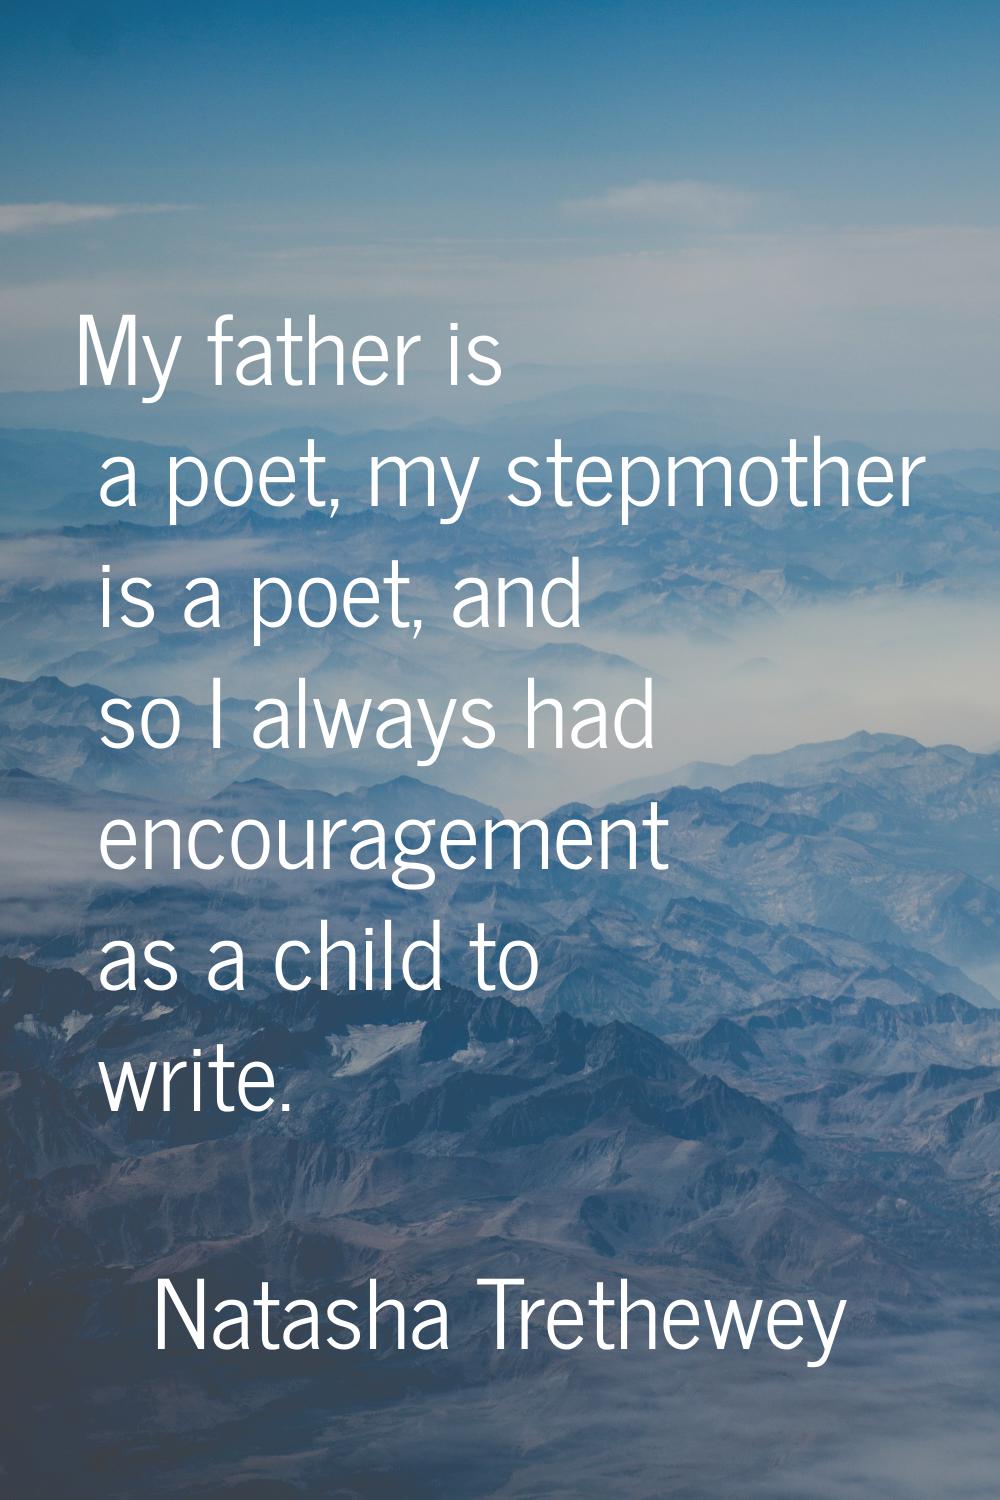 My father is a poet, my stepmother is a poet, and so I always had encouragement as a child to write